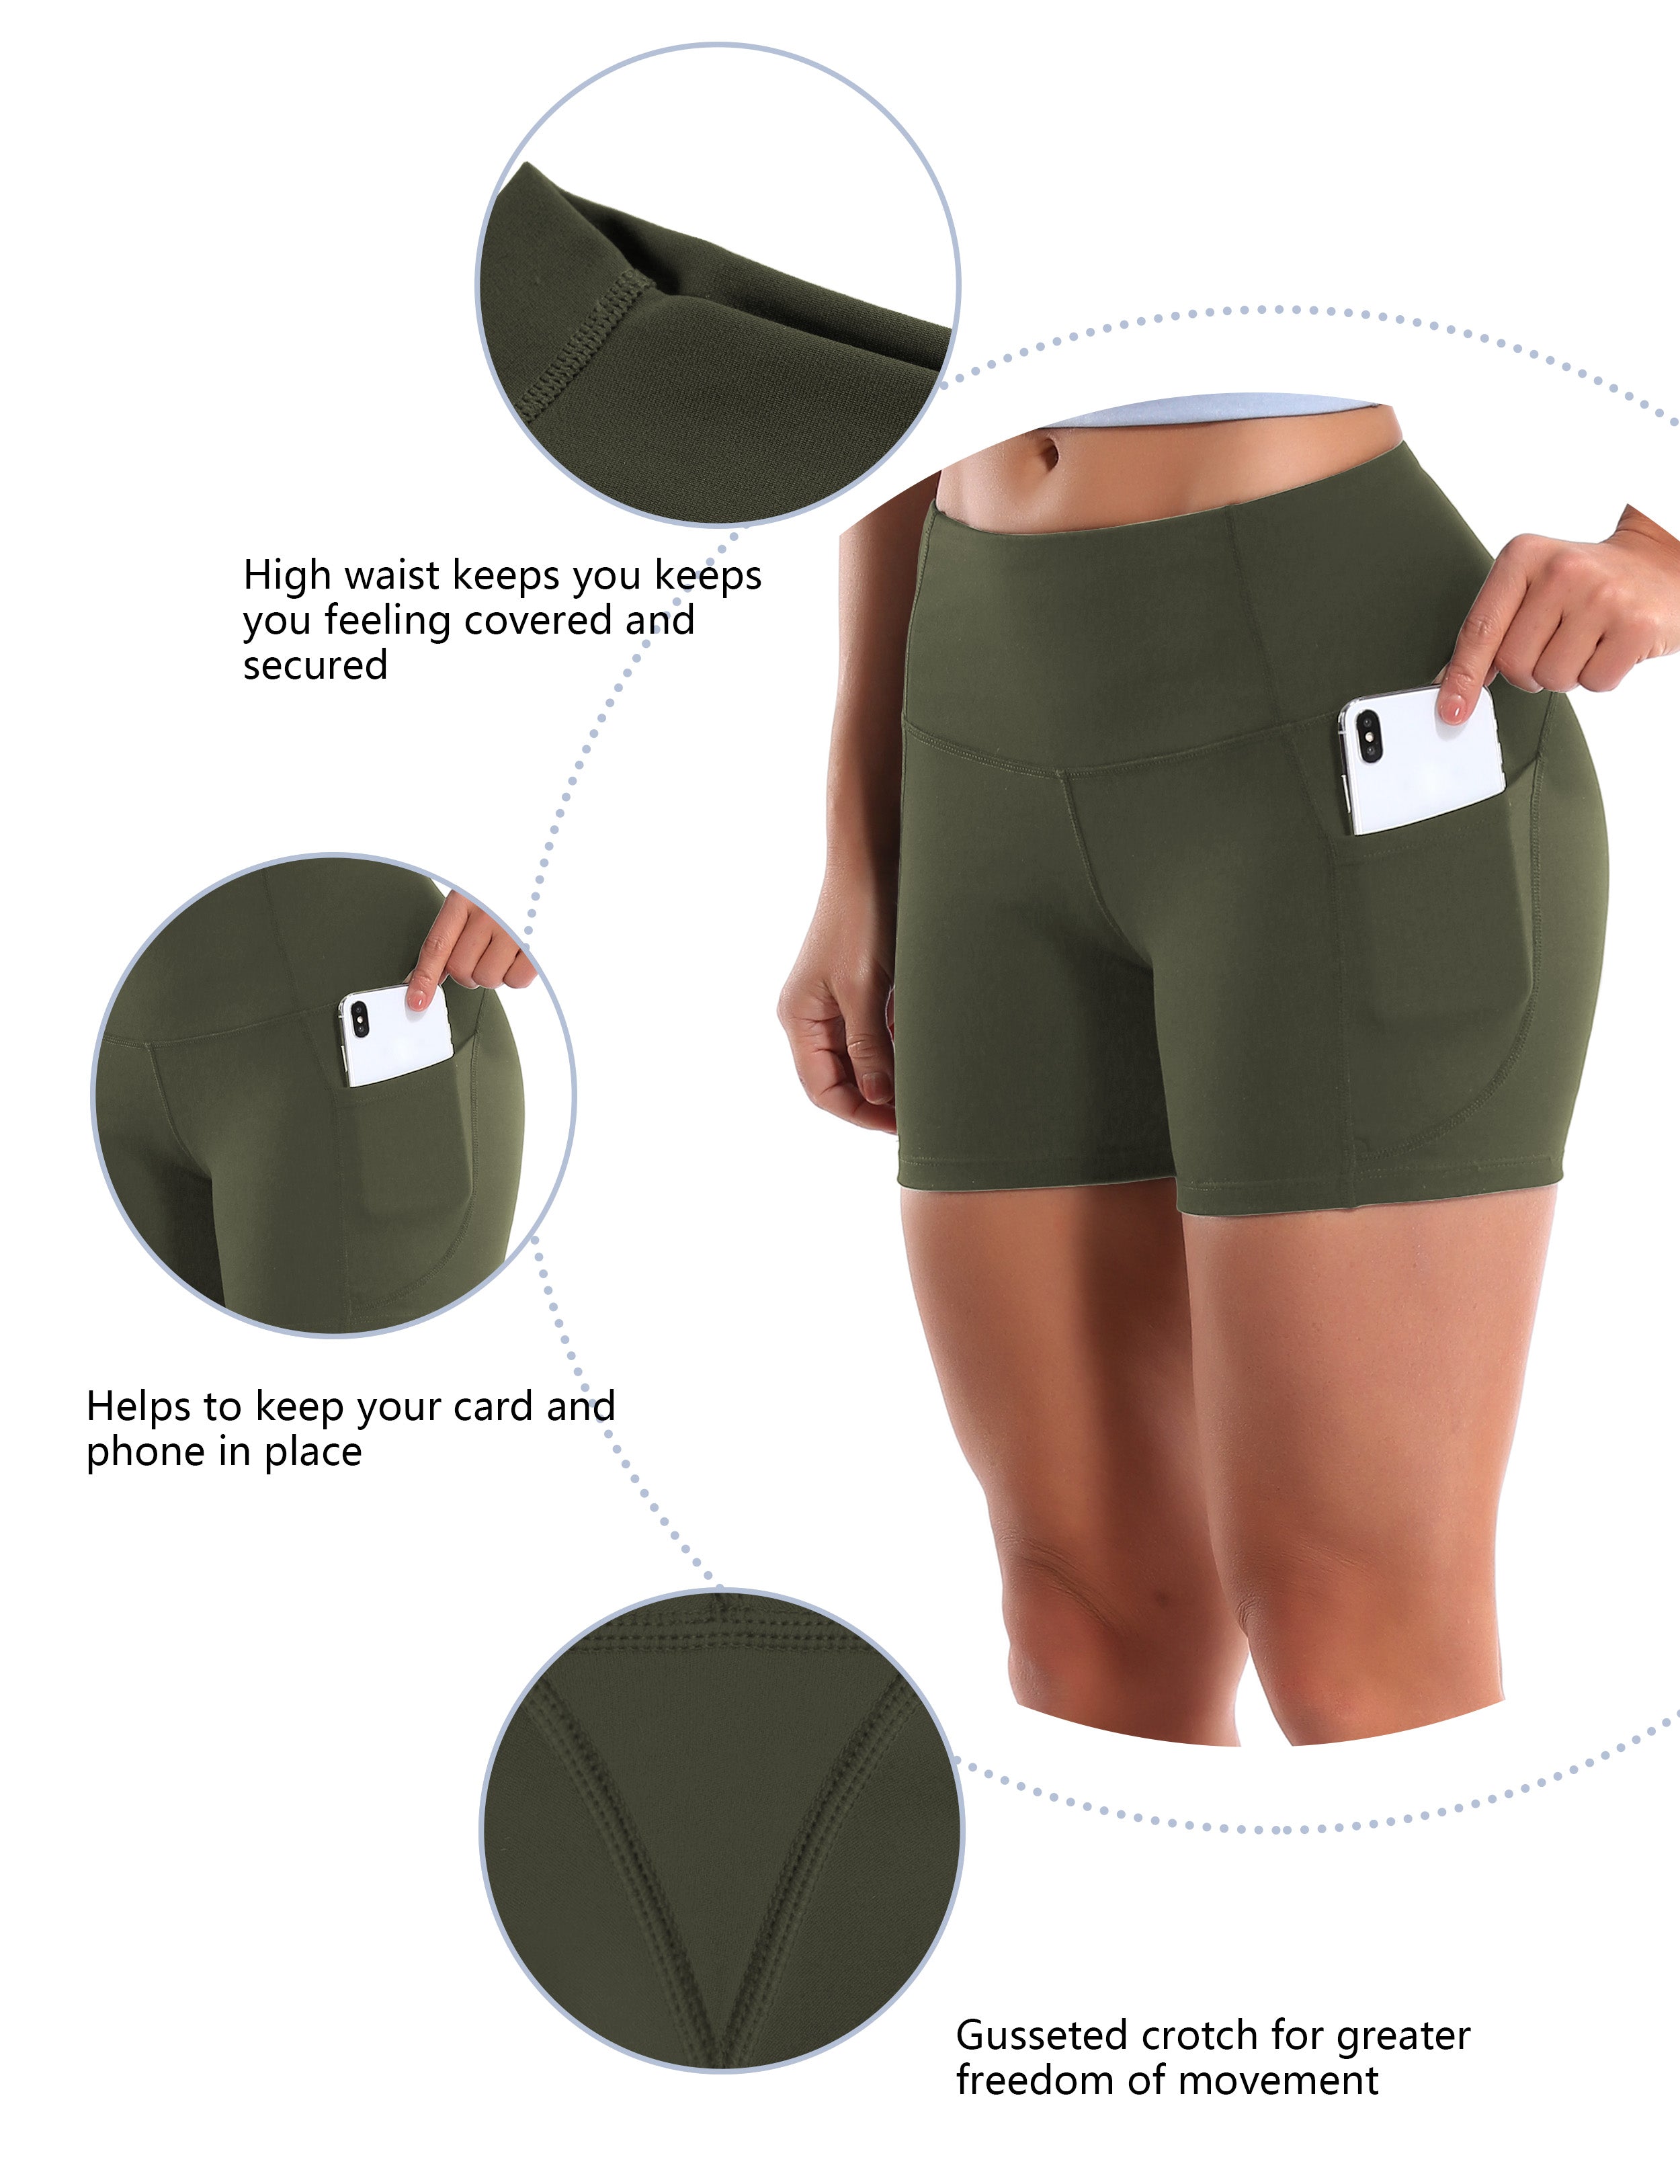 High Waist Side Pockets yogastudio Shorts green Softest-ever fabric High elasticity 4-way stretch Fabric doesn't attract lint easily No see-through Moisture-wicking Machine wash 88% Nylon, 12% Spandex